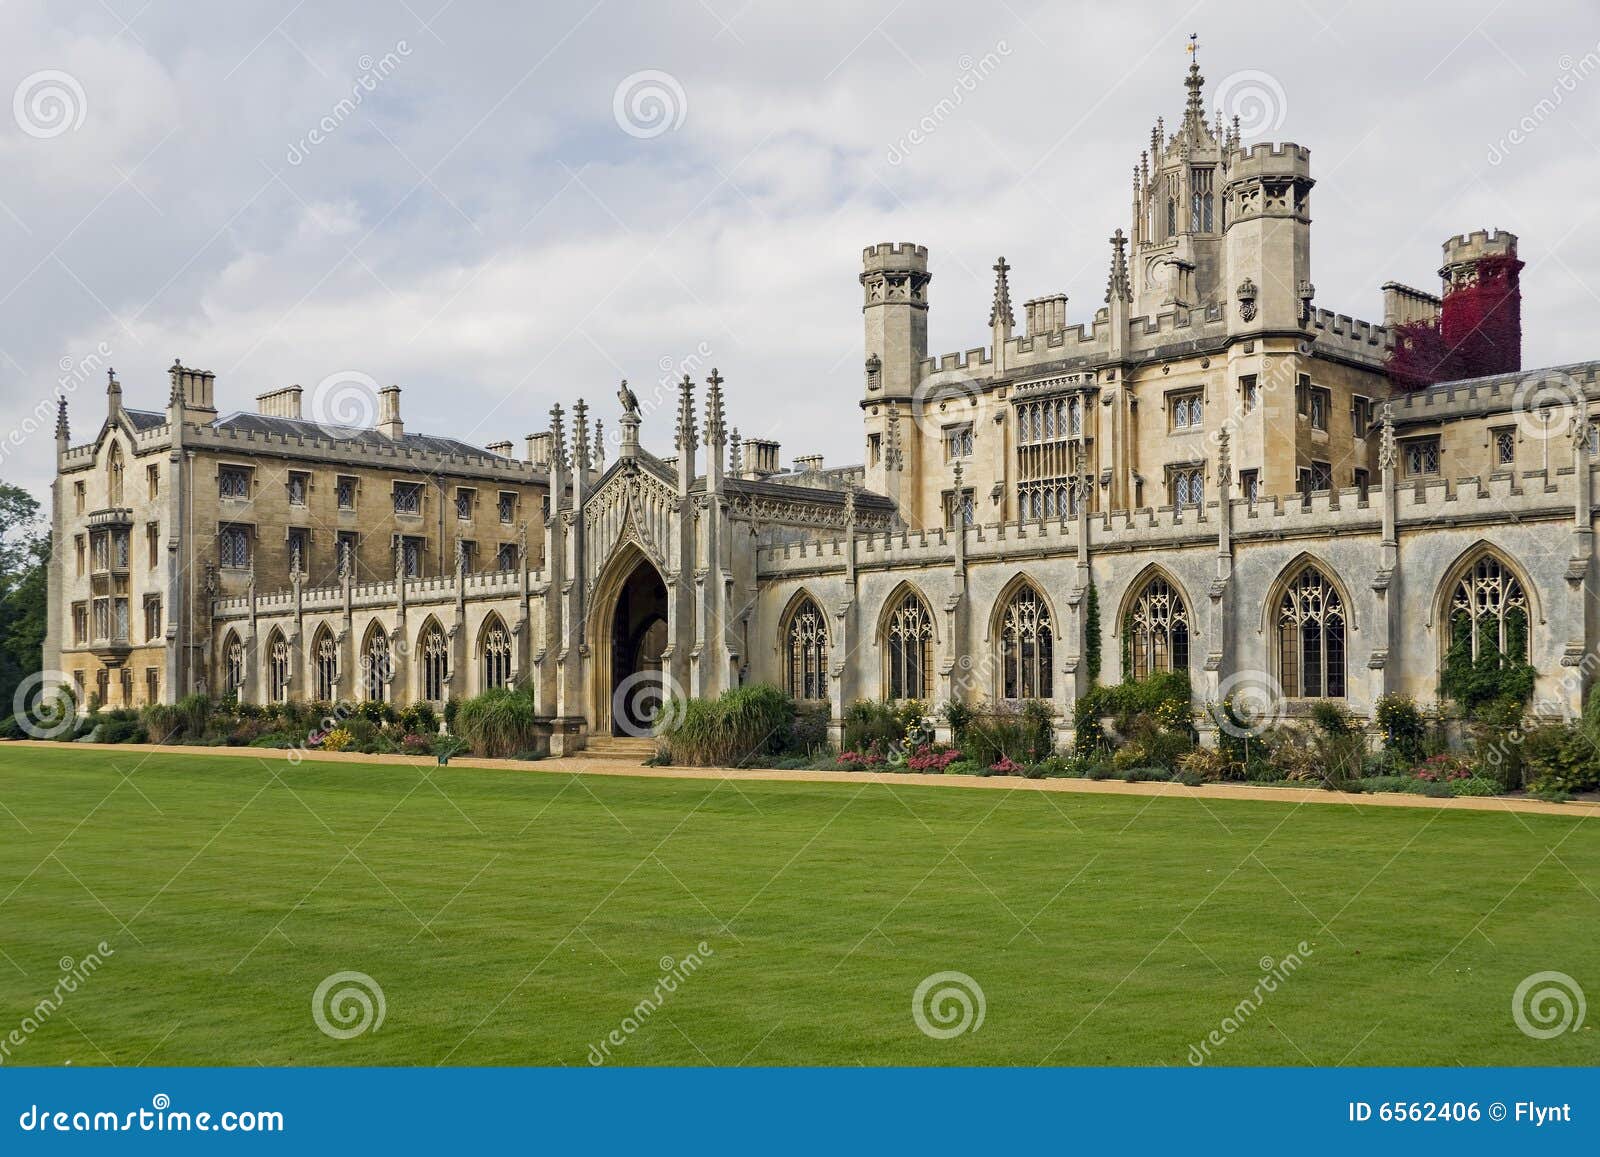 17,209 Cambridge Photos - Free & Royalty-Free from